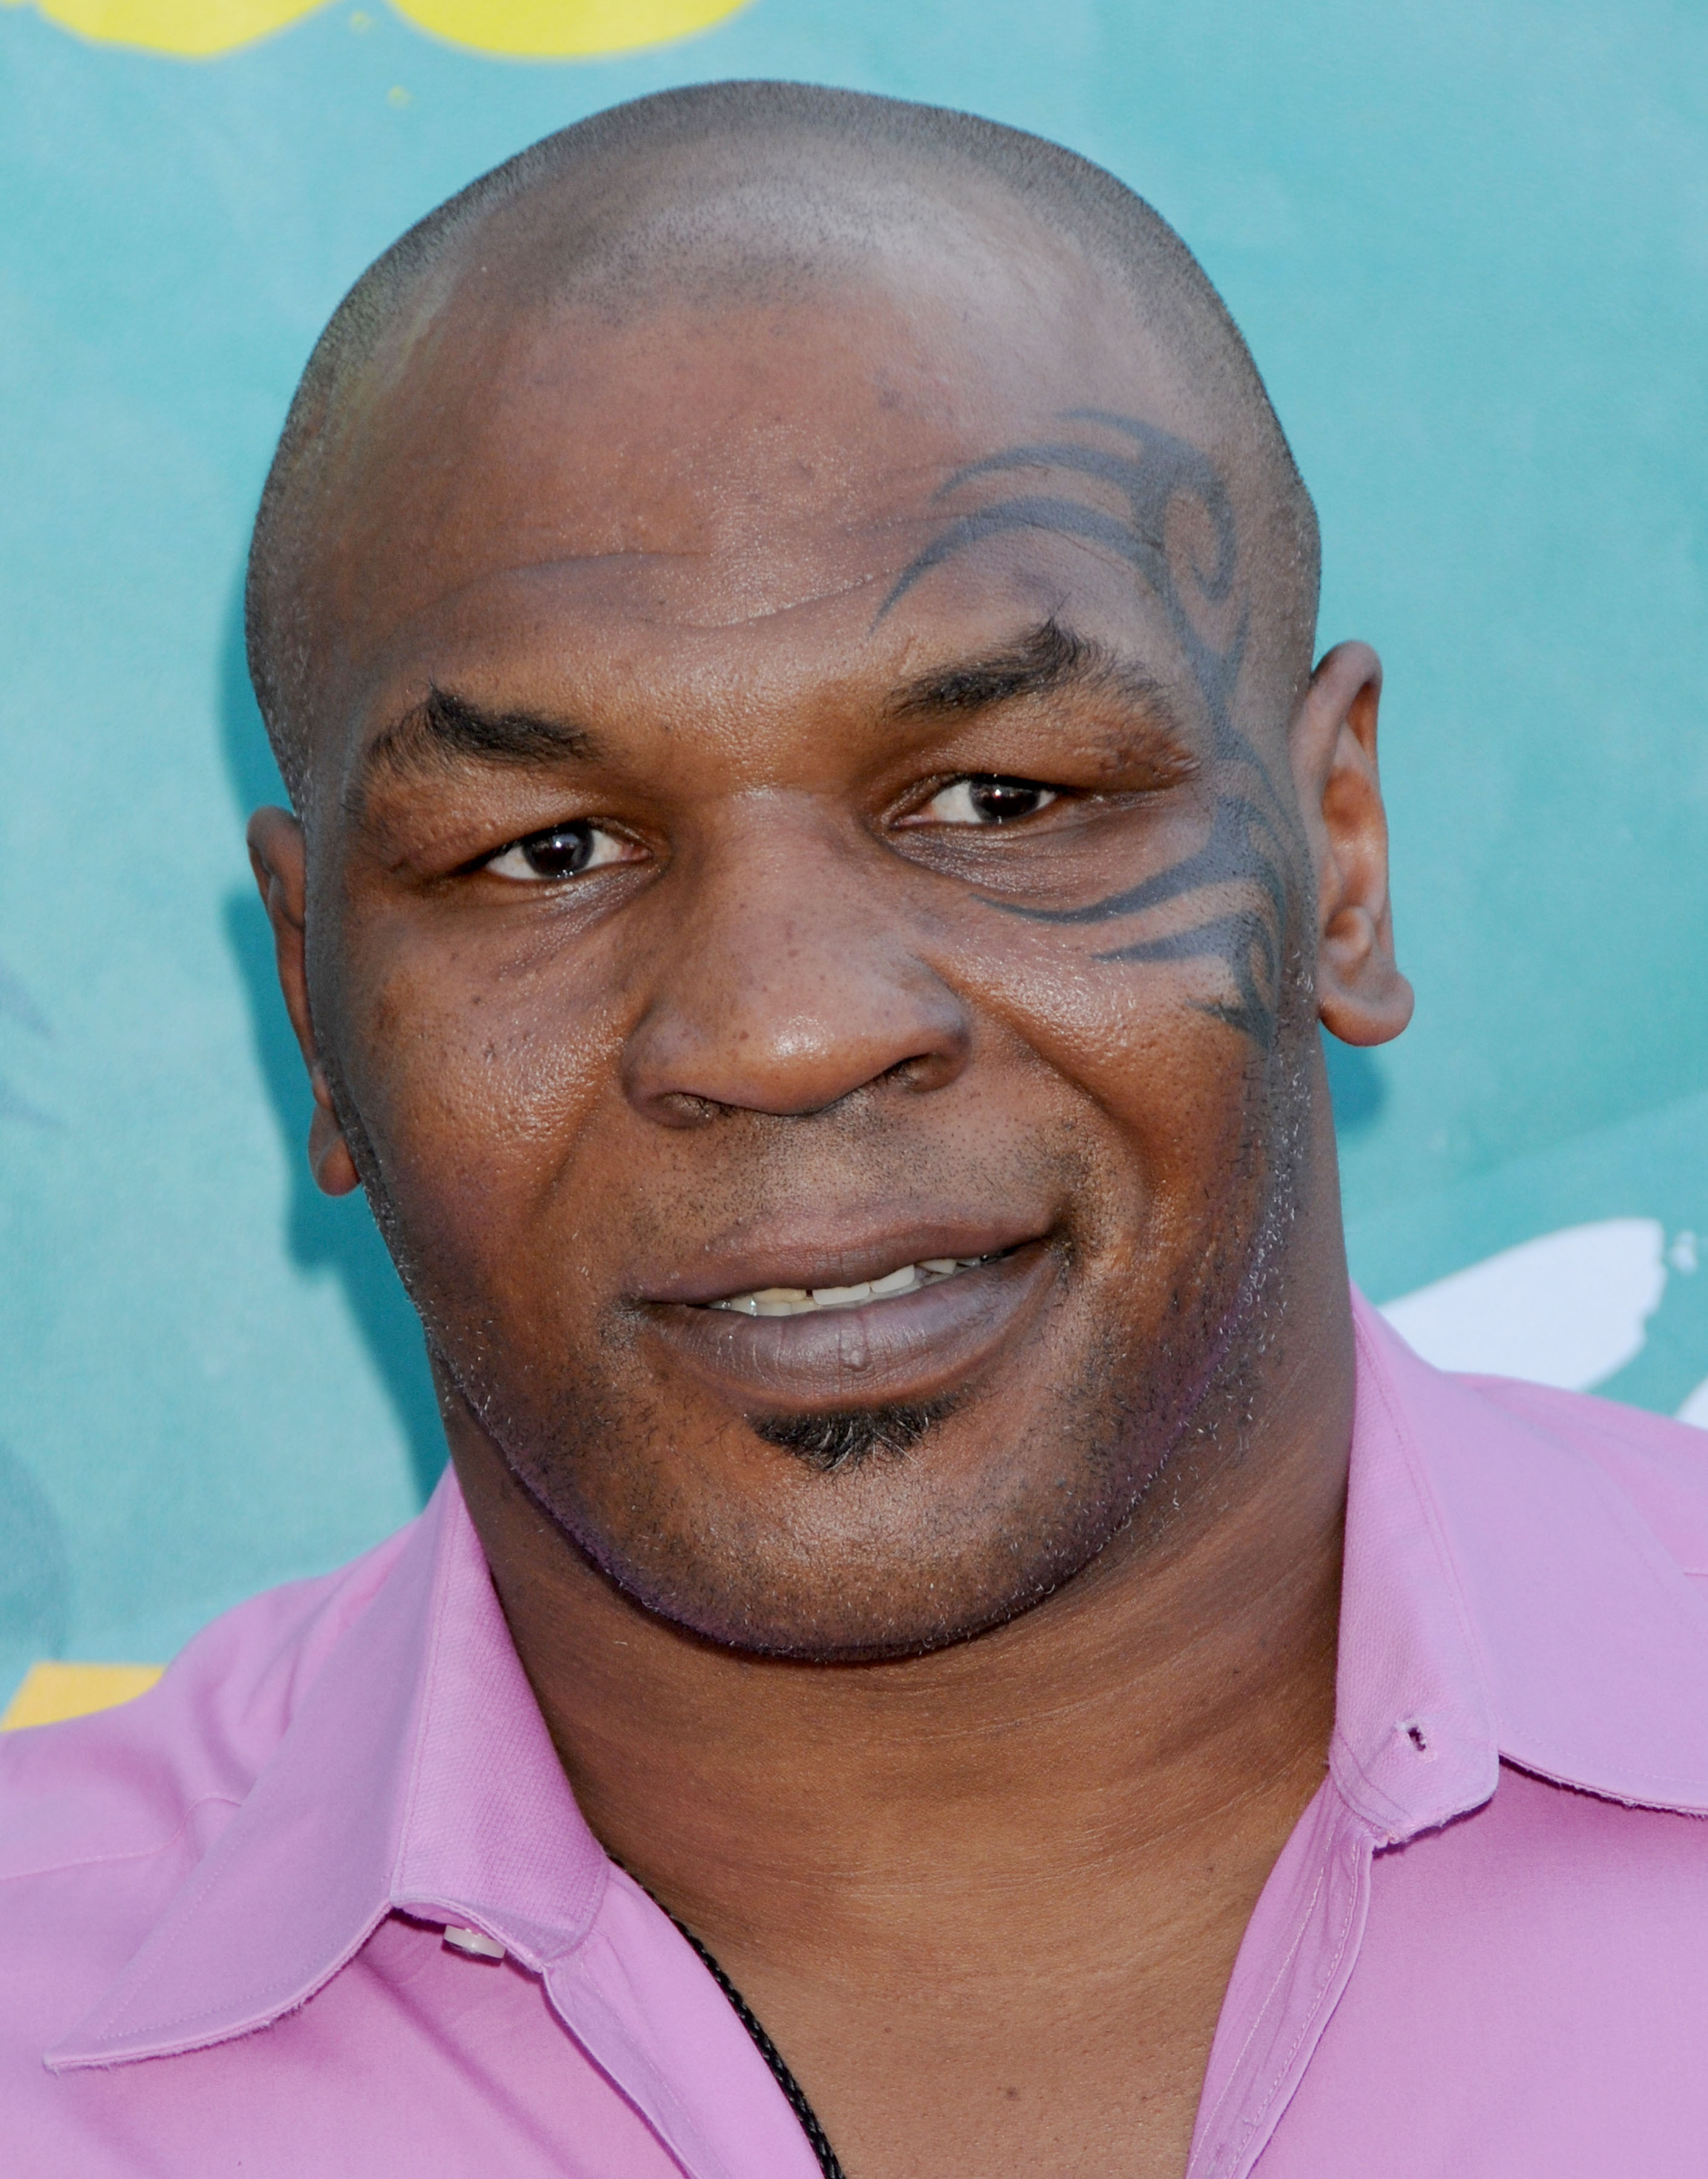 Mike Tyson arriving at The Teen Choice Awards 2009, which took place at the Universal Amphitheater in Universal City, California | Source: Getty Images